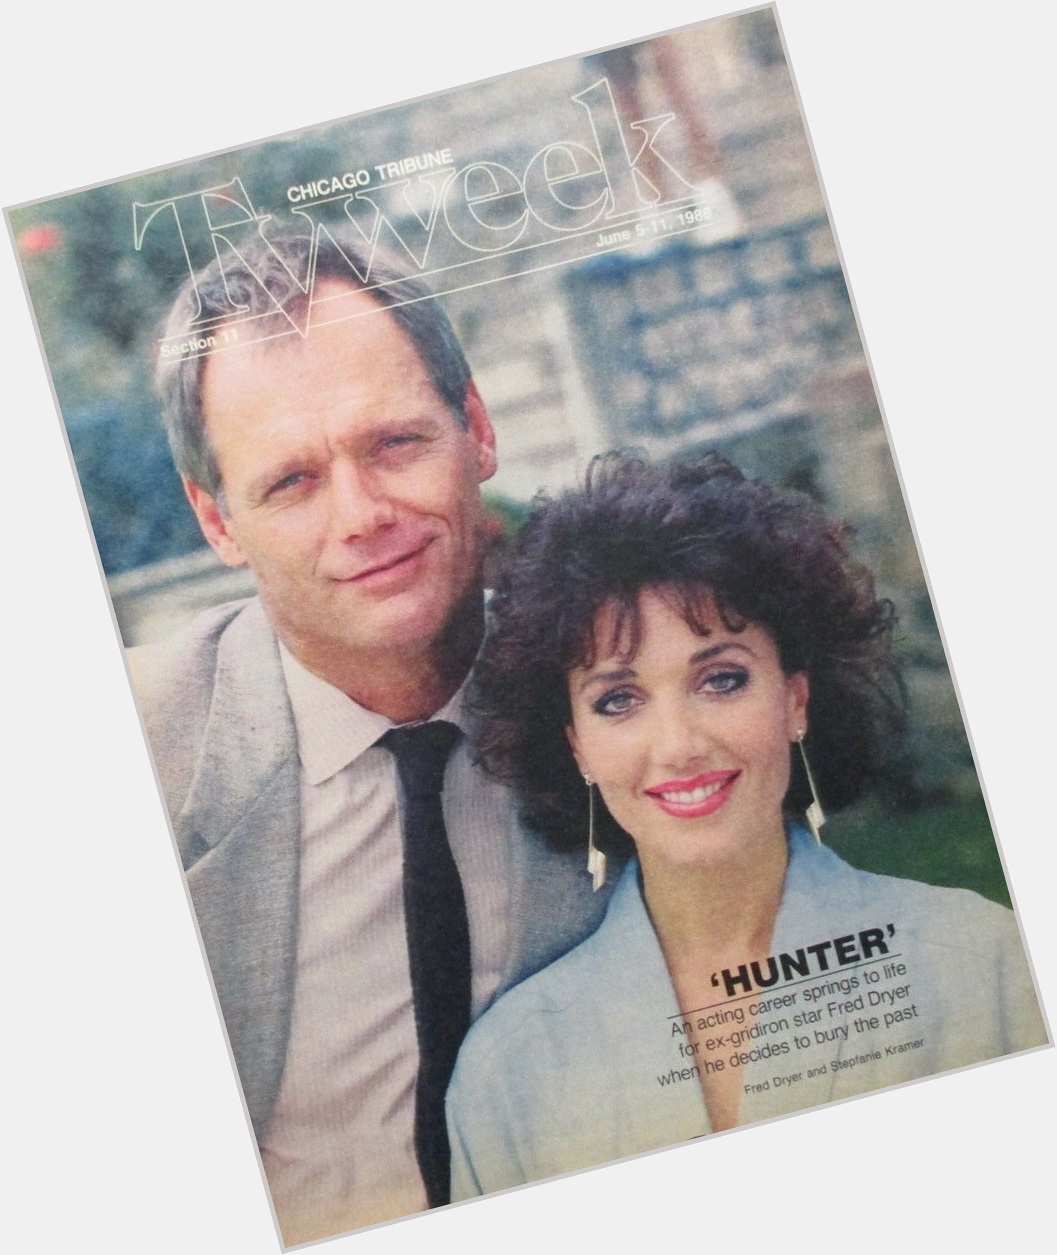 Happy Birthday to Fred Dryer, born on this day in 1946.
Chicago Tribune TV Week.  June 5-11, 1988 